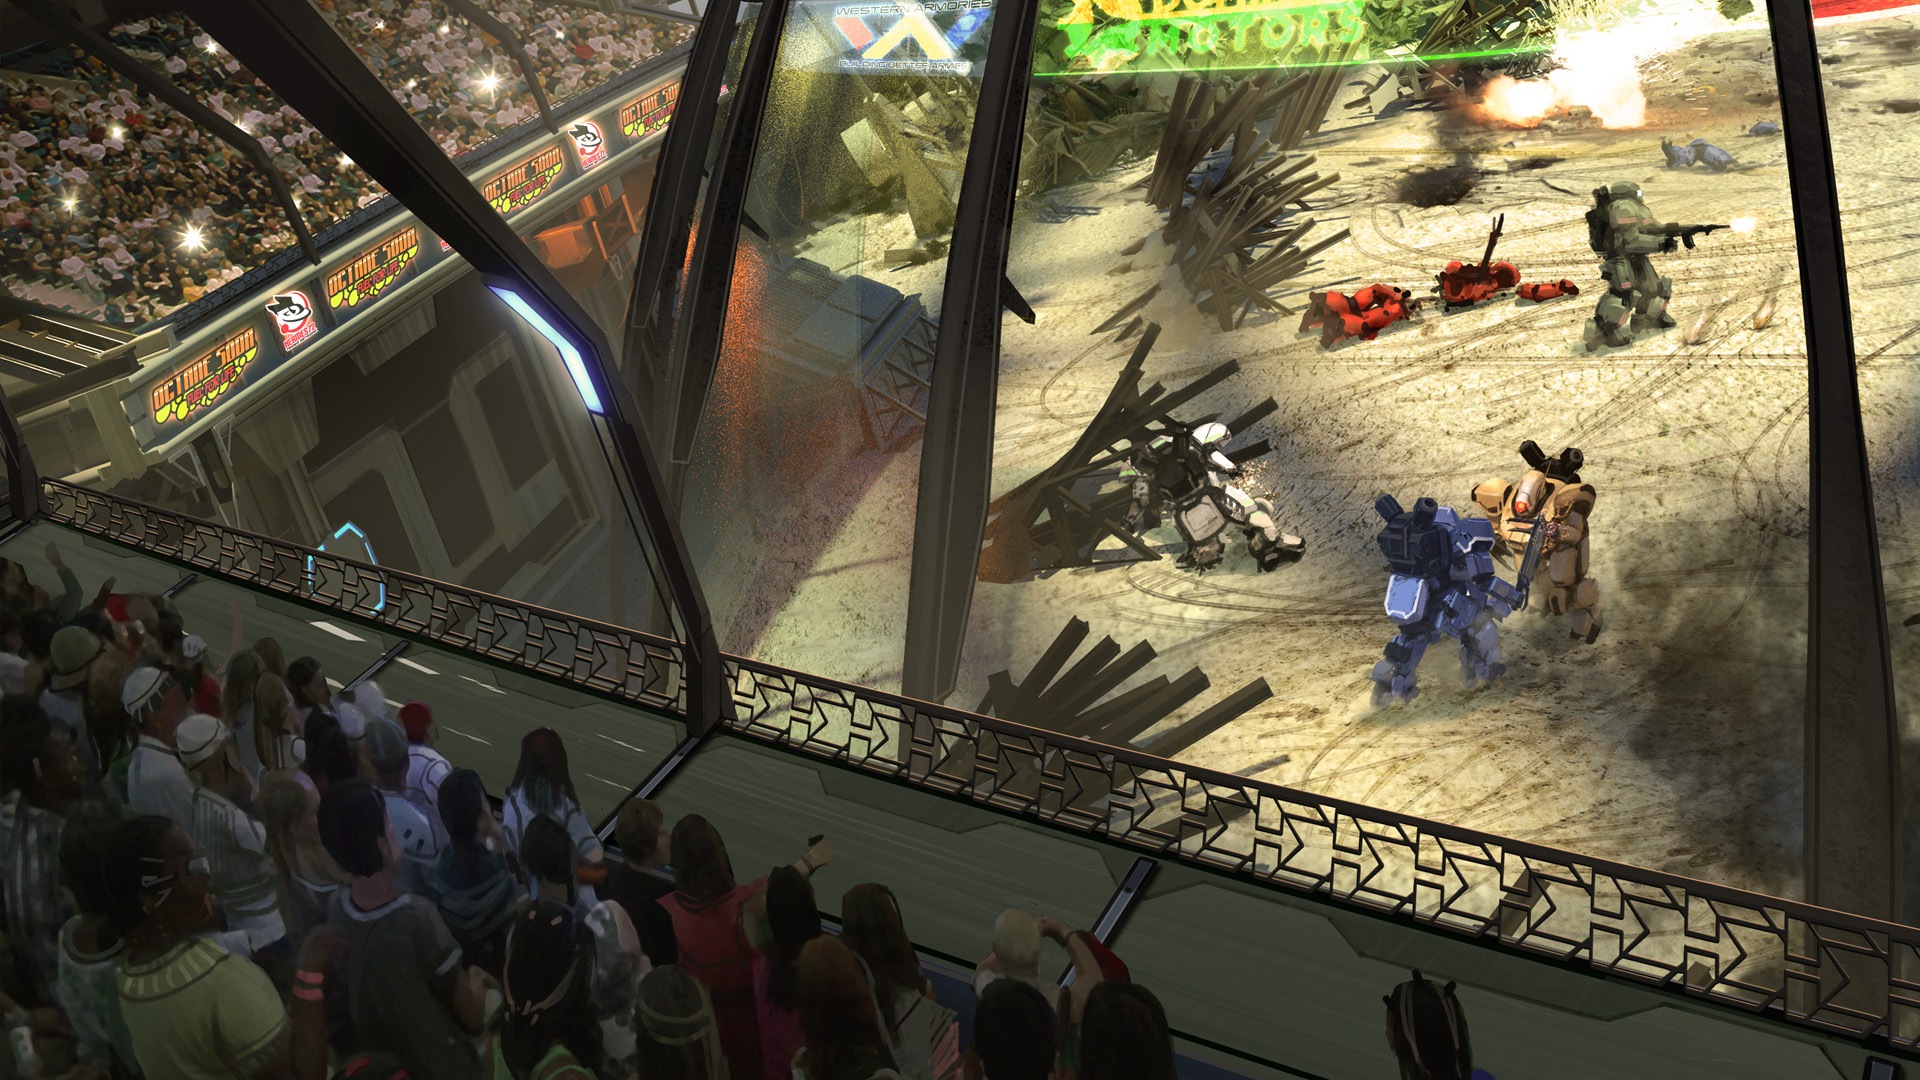 Computer Generated Artwork Showing Dueling Gears in Heavy Gear Assault with Cheering Fans